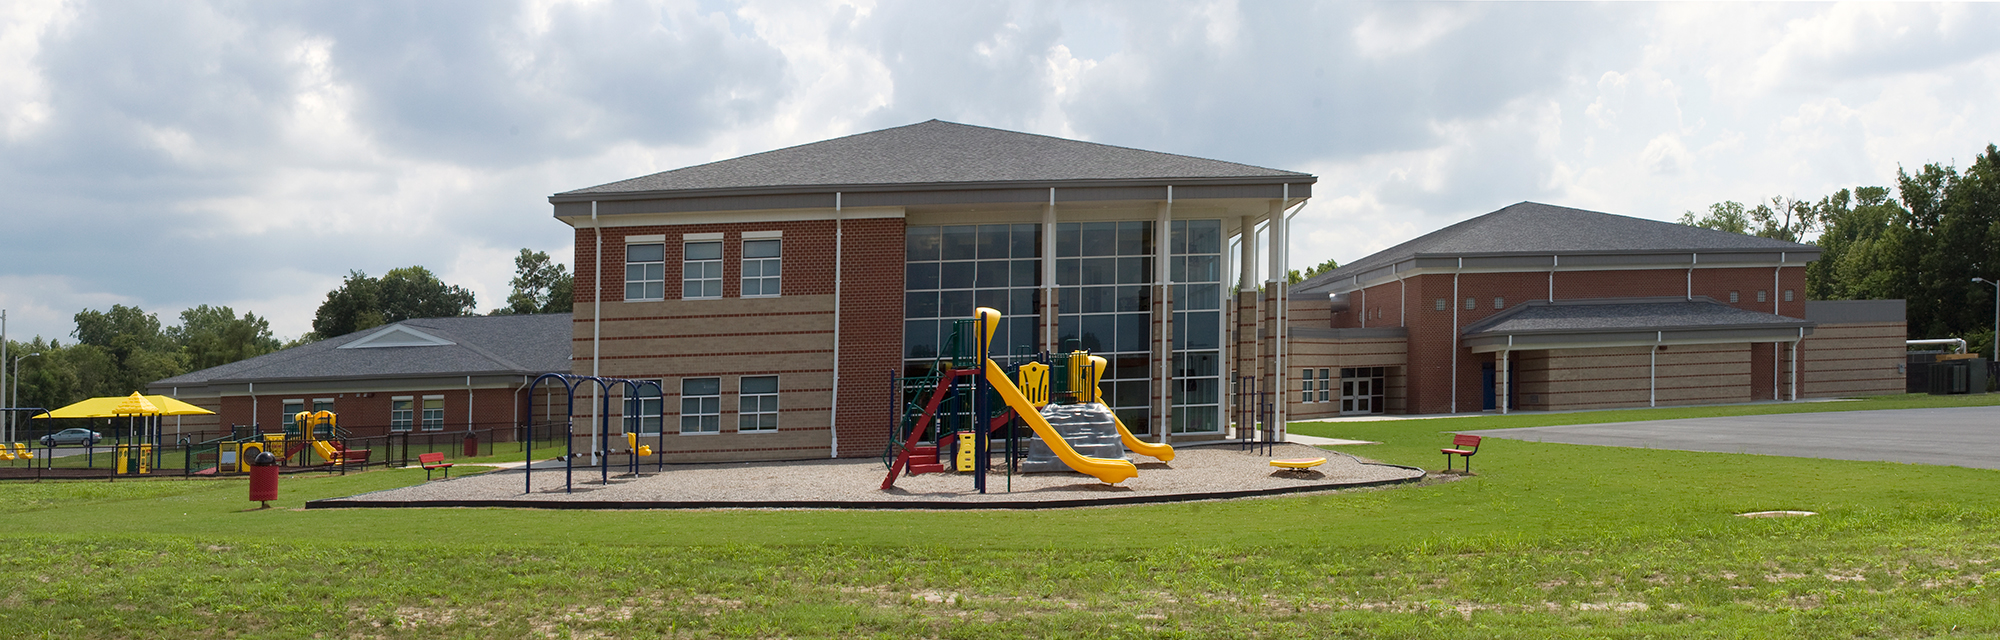 Facility Performance Consulting for Suffolk Public Schools